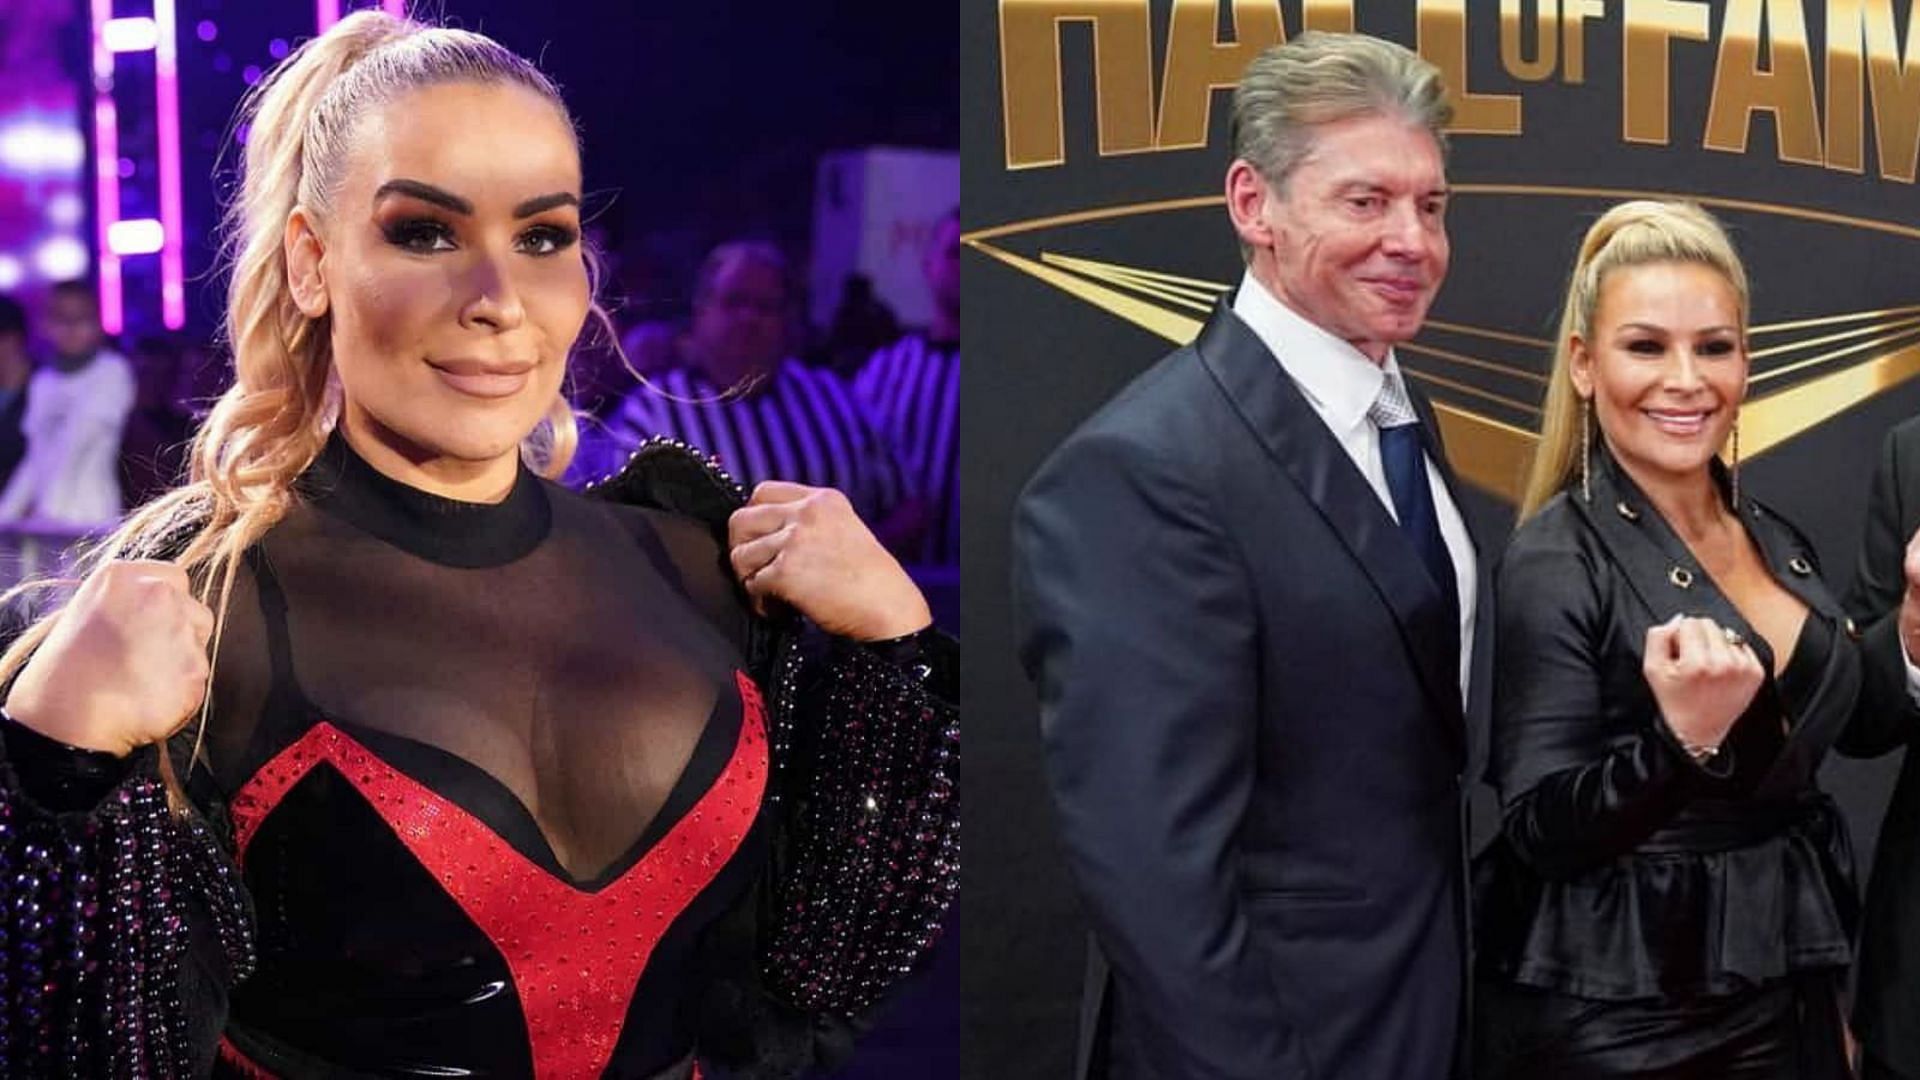 Vince McMahon and Natalya have a mutual understanding